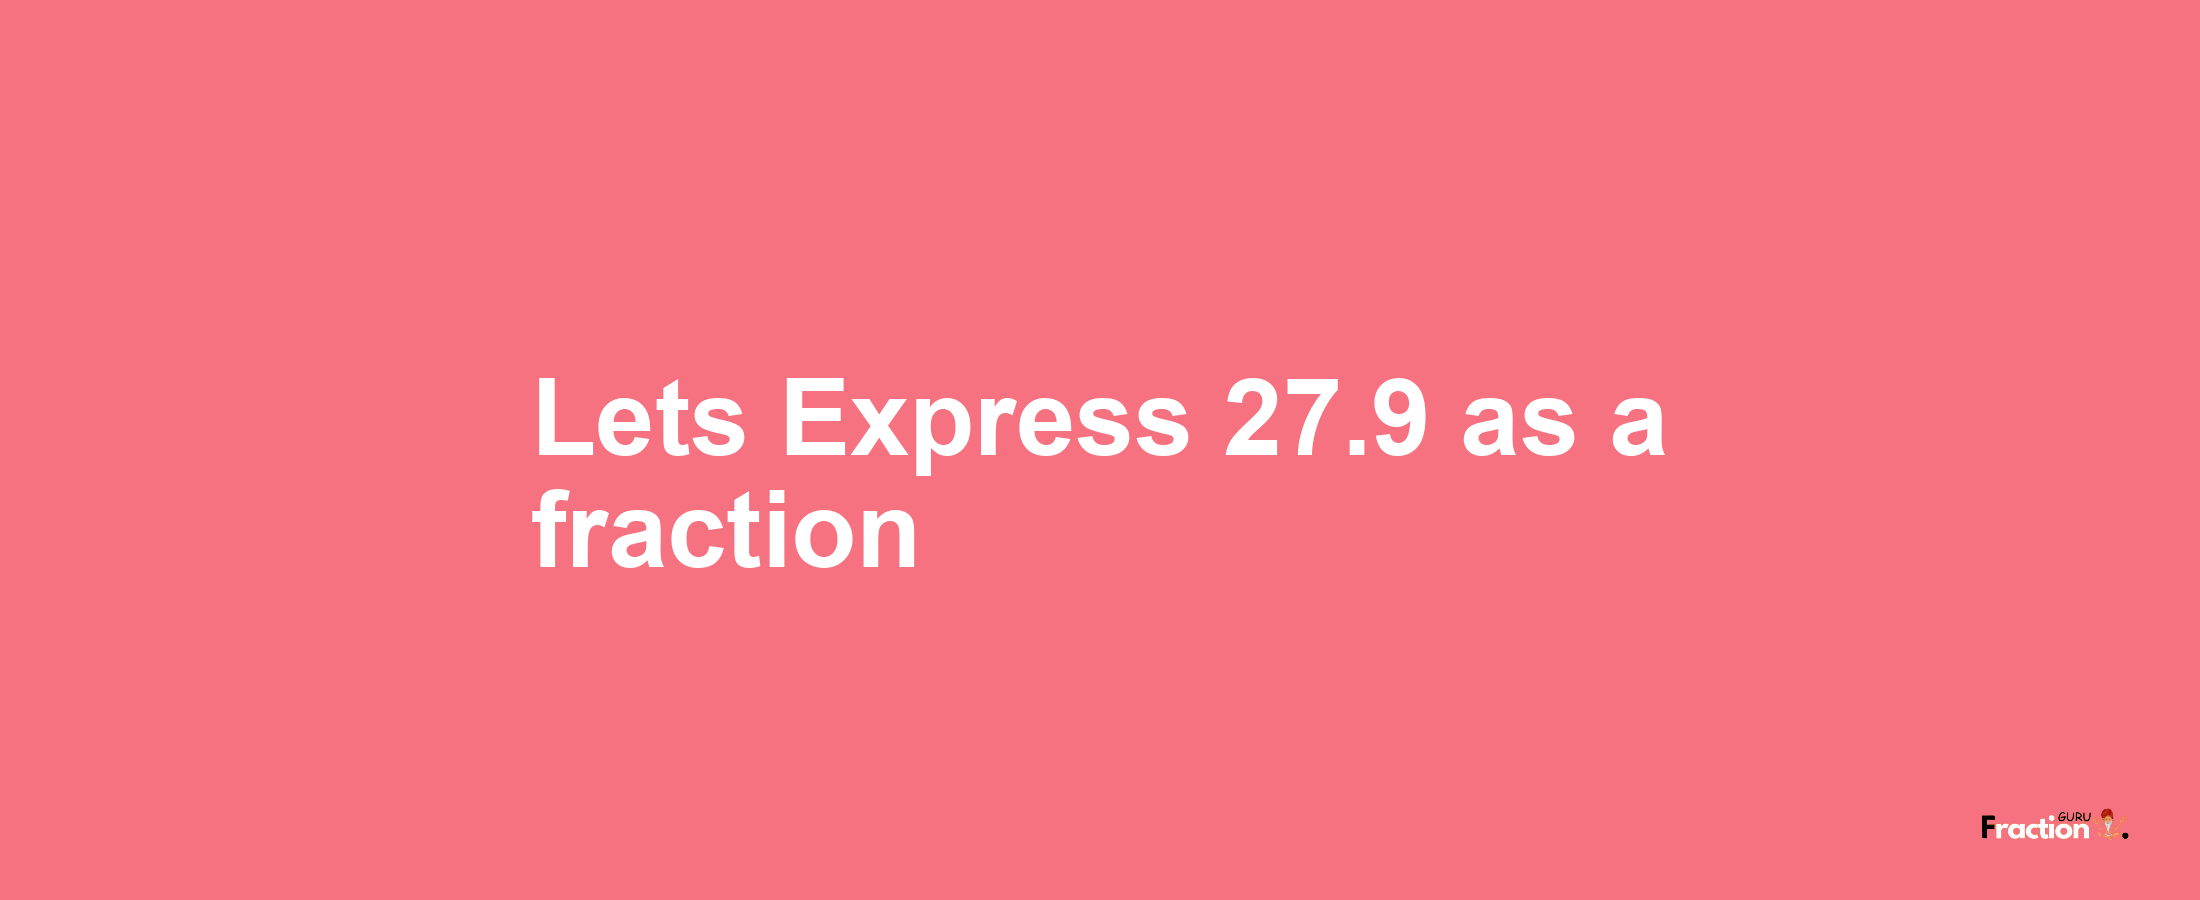 Lets Express 27.9 as afraction